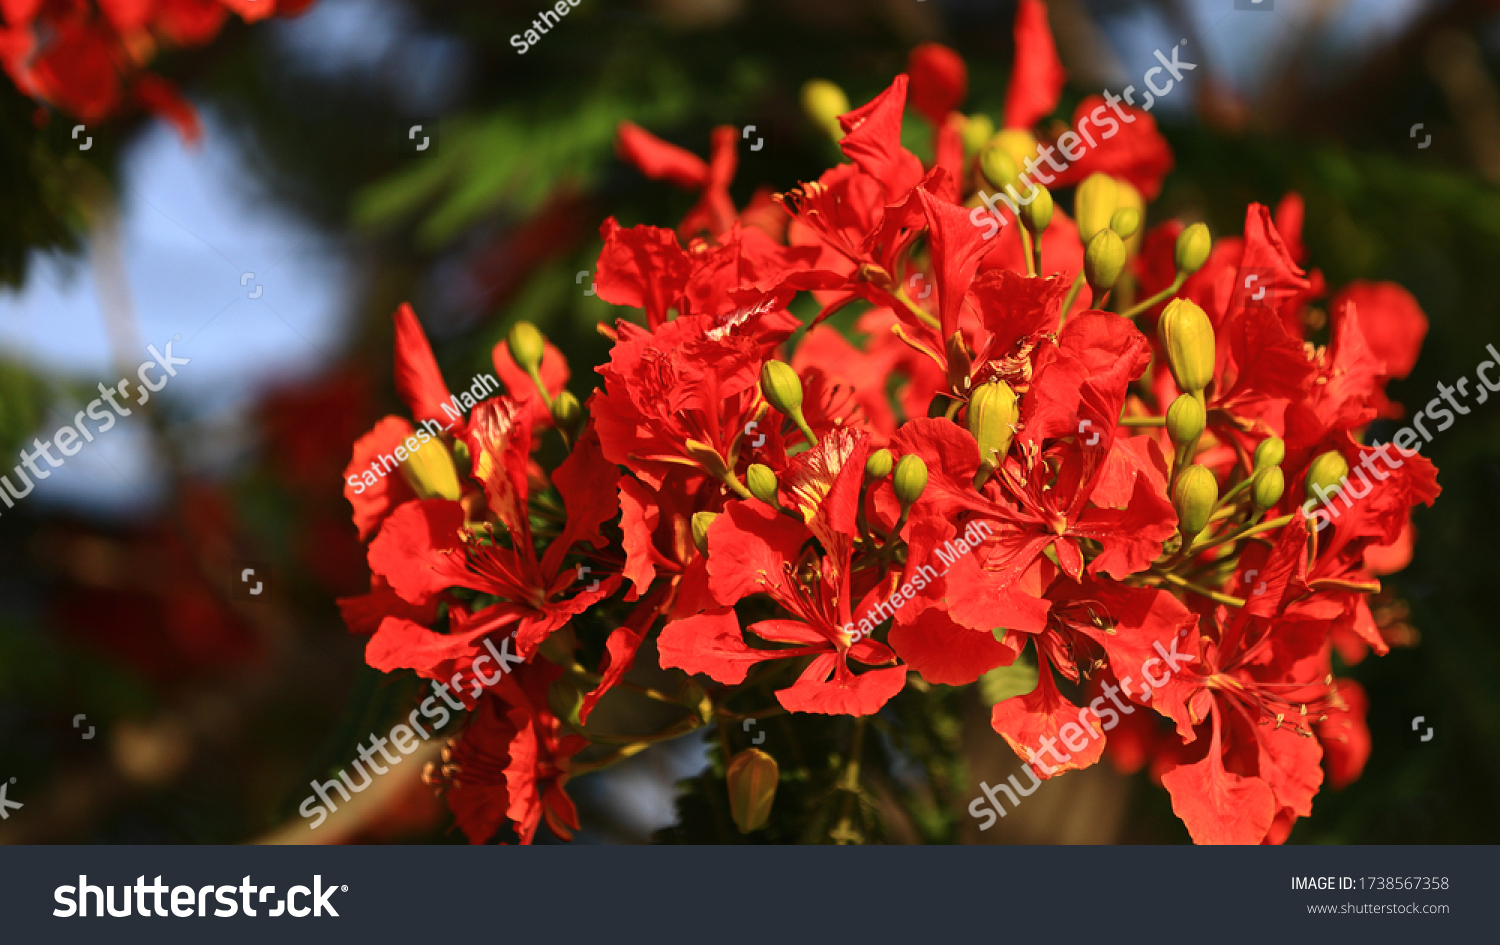 Red and orange Flowers seen on road sides. Blooming May-flower trees along the Pavements in a Planned city. Lusail city, where FIFA 2020 will be held #1738567358